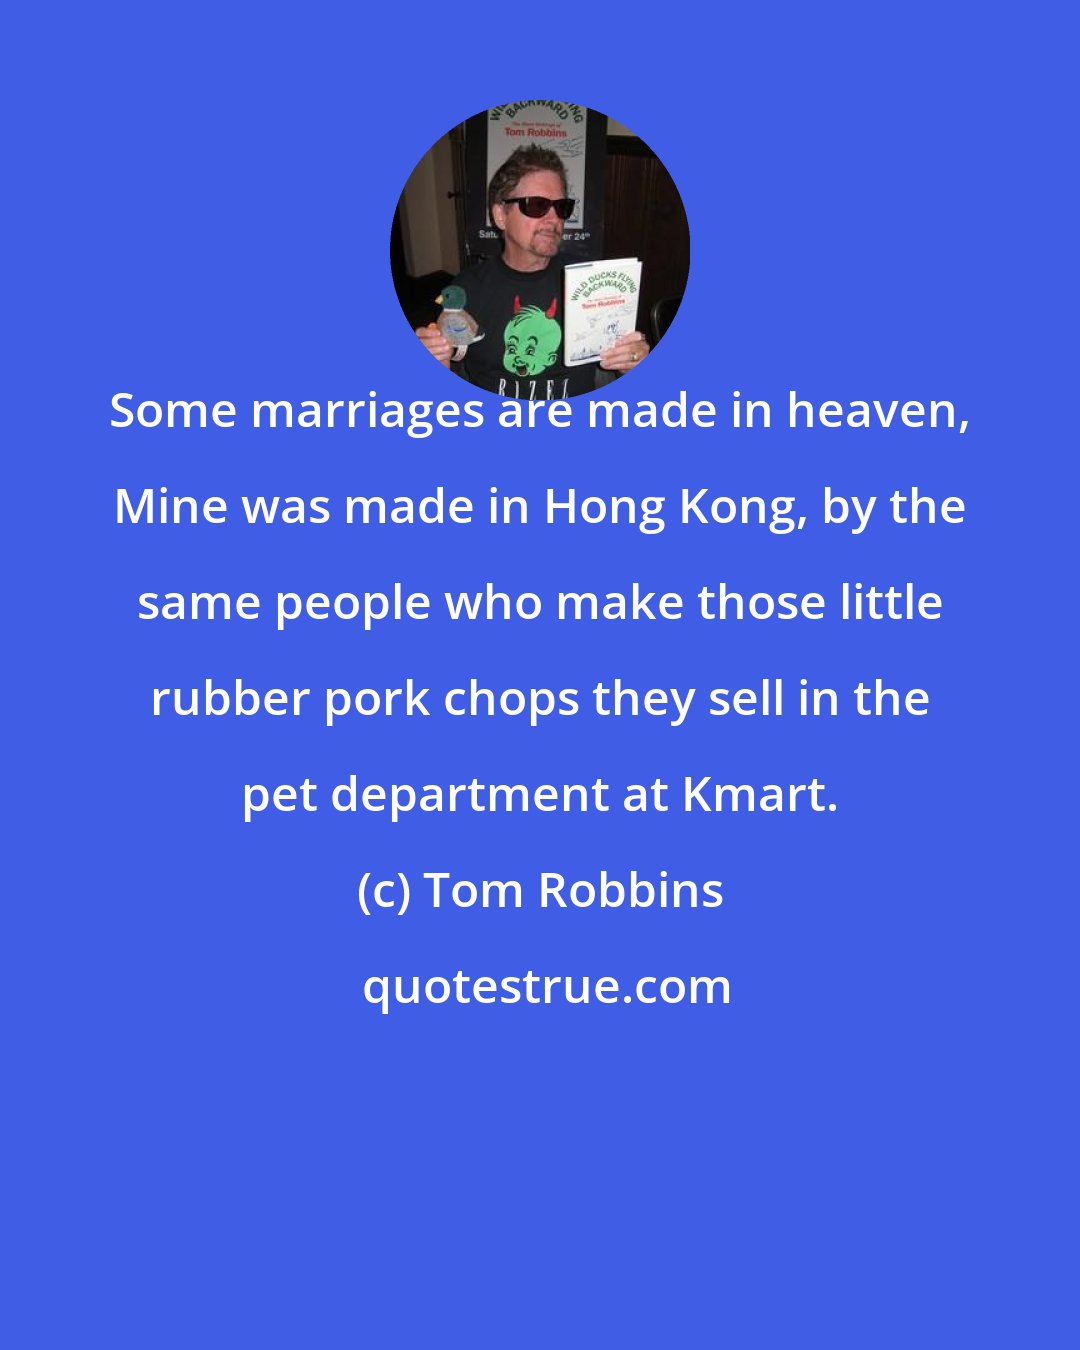 Tom Robbins: Some marriages are made in heaven, Mine was made in Hong Kong, by the same people who make those little rubber pork chops they sell in the pet department at Kmart.